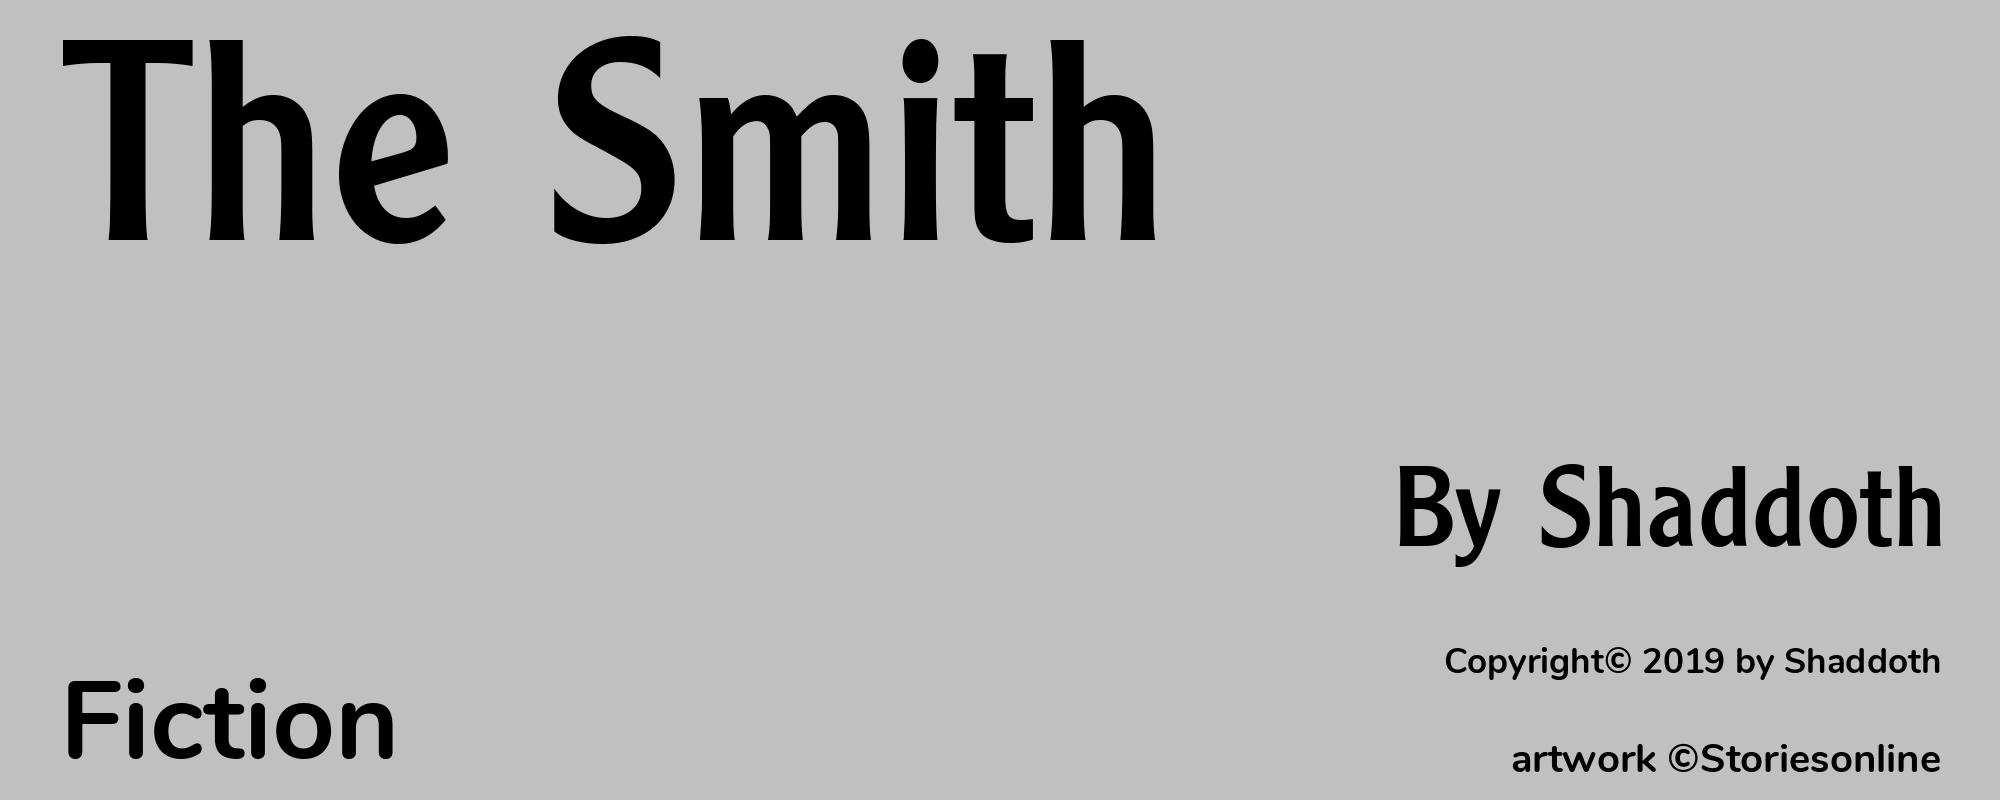 The Smith - Cover